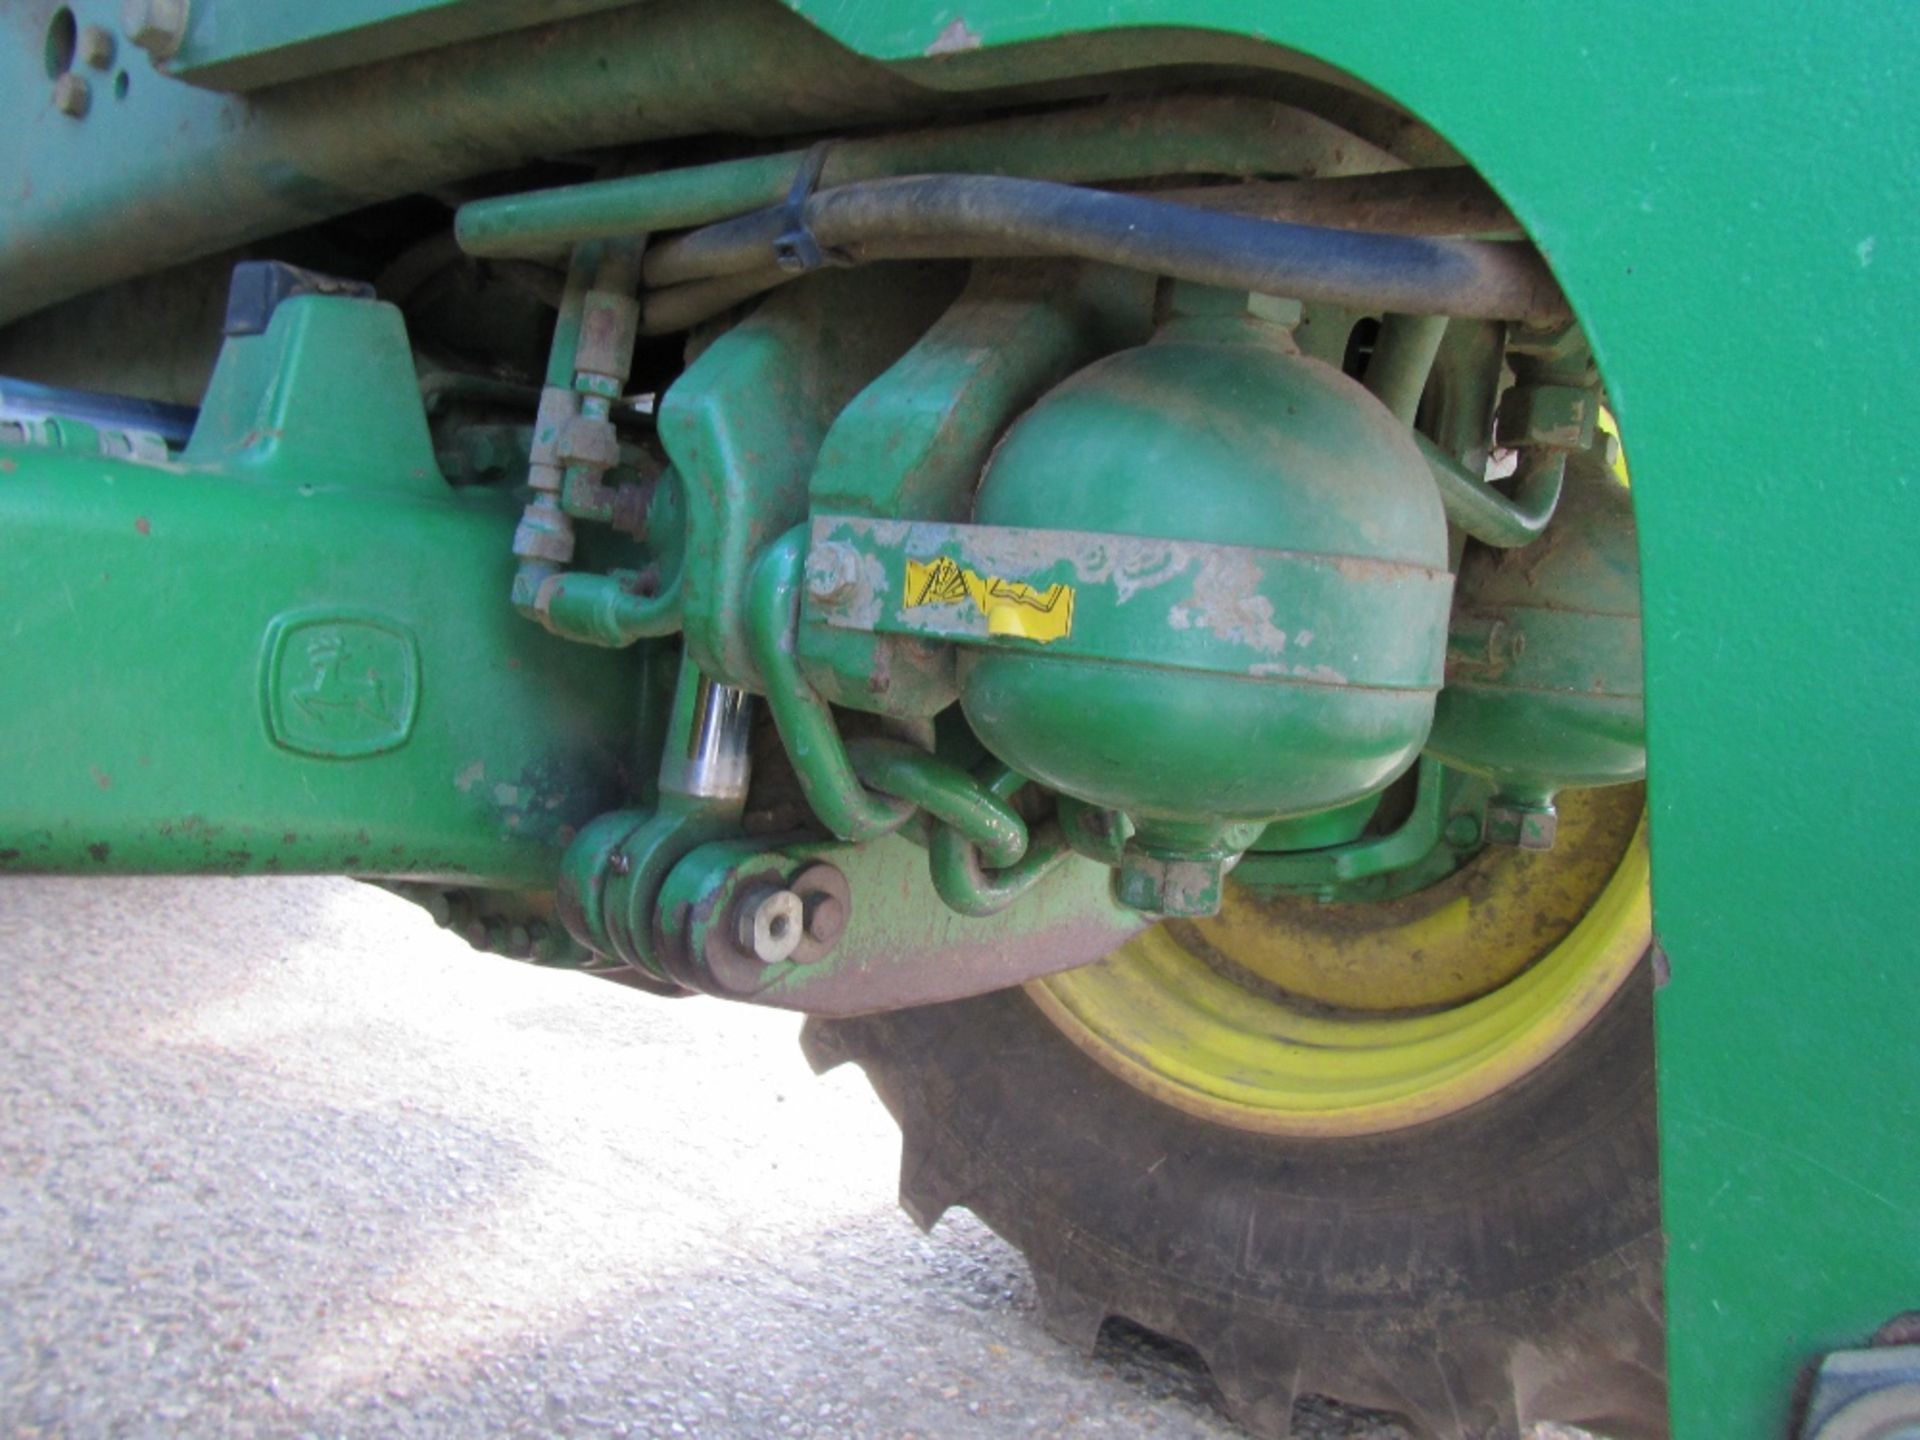 2010 John Deere 6930P 50k Auto Quad Tractor with 4 Electric Spools, Power Beyond, Heated Rear - Image 6 of 22